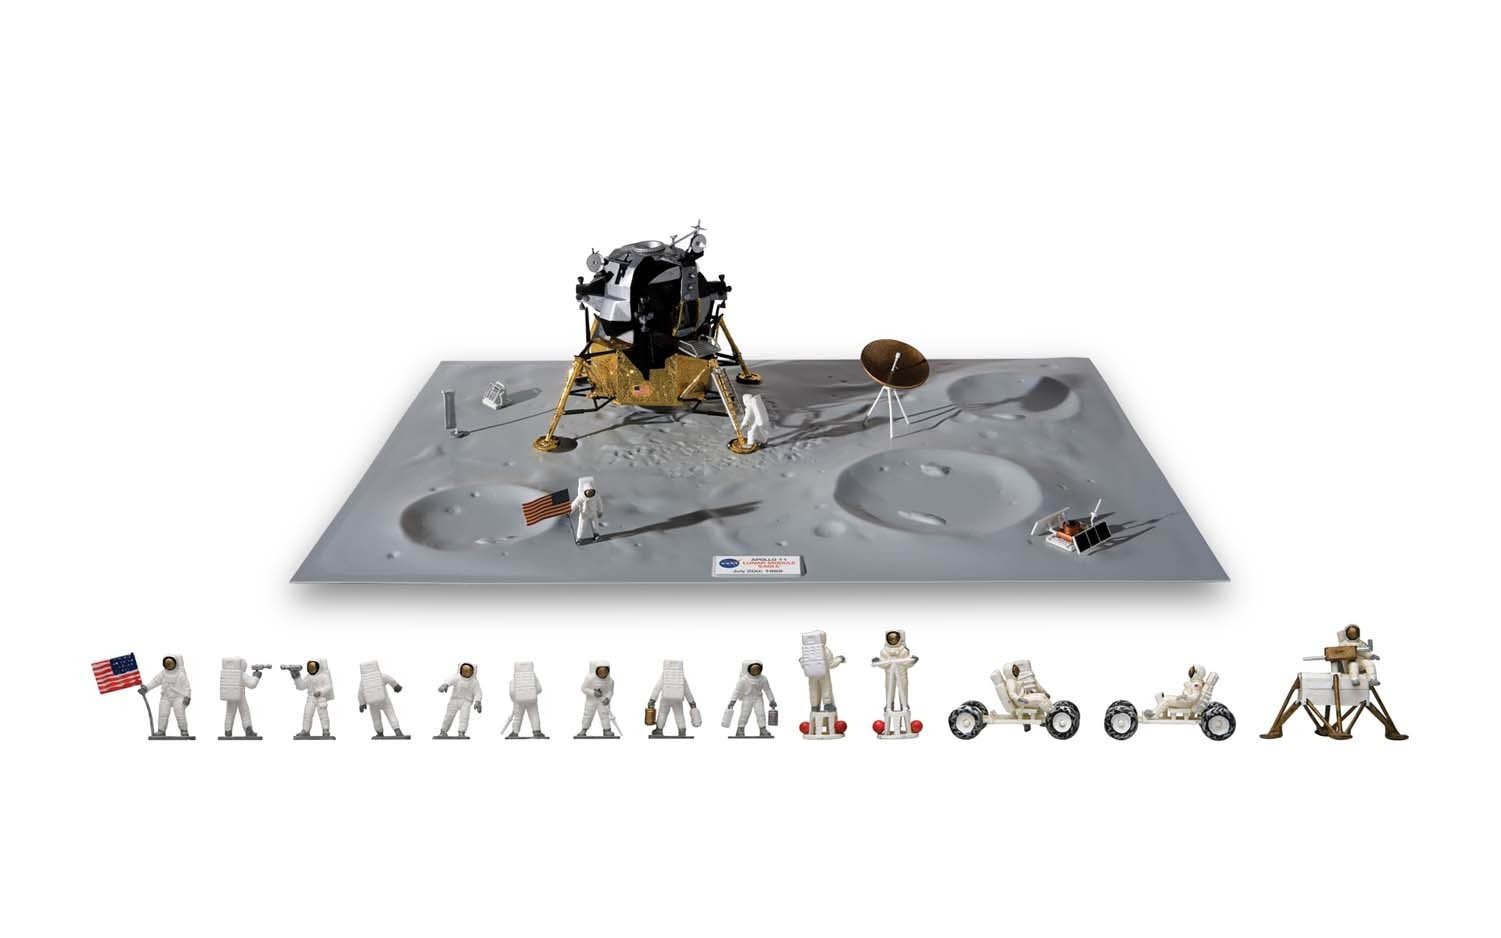 NASA One Small Step For Man - 40th Anniversary of the Moon Landing Space Exploration Gift Set by Airfix